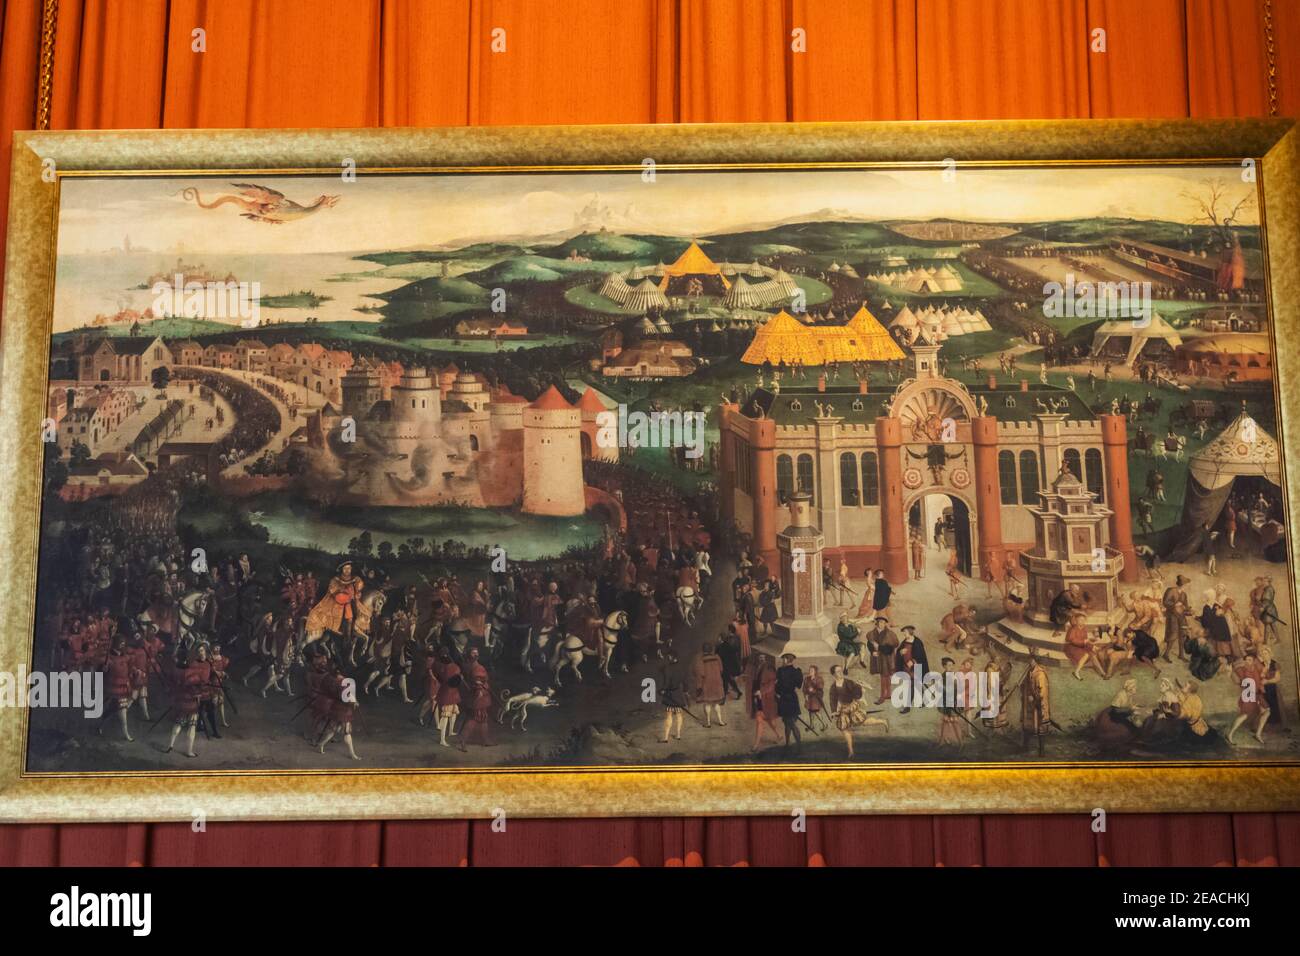 England, Kent, Leeds Castle, Painting of The Field of Cloth of Gold showing The Summit Meeting Between Henry VIII and Francis I of France in Ballinghem France Stock Photo